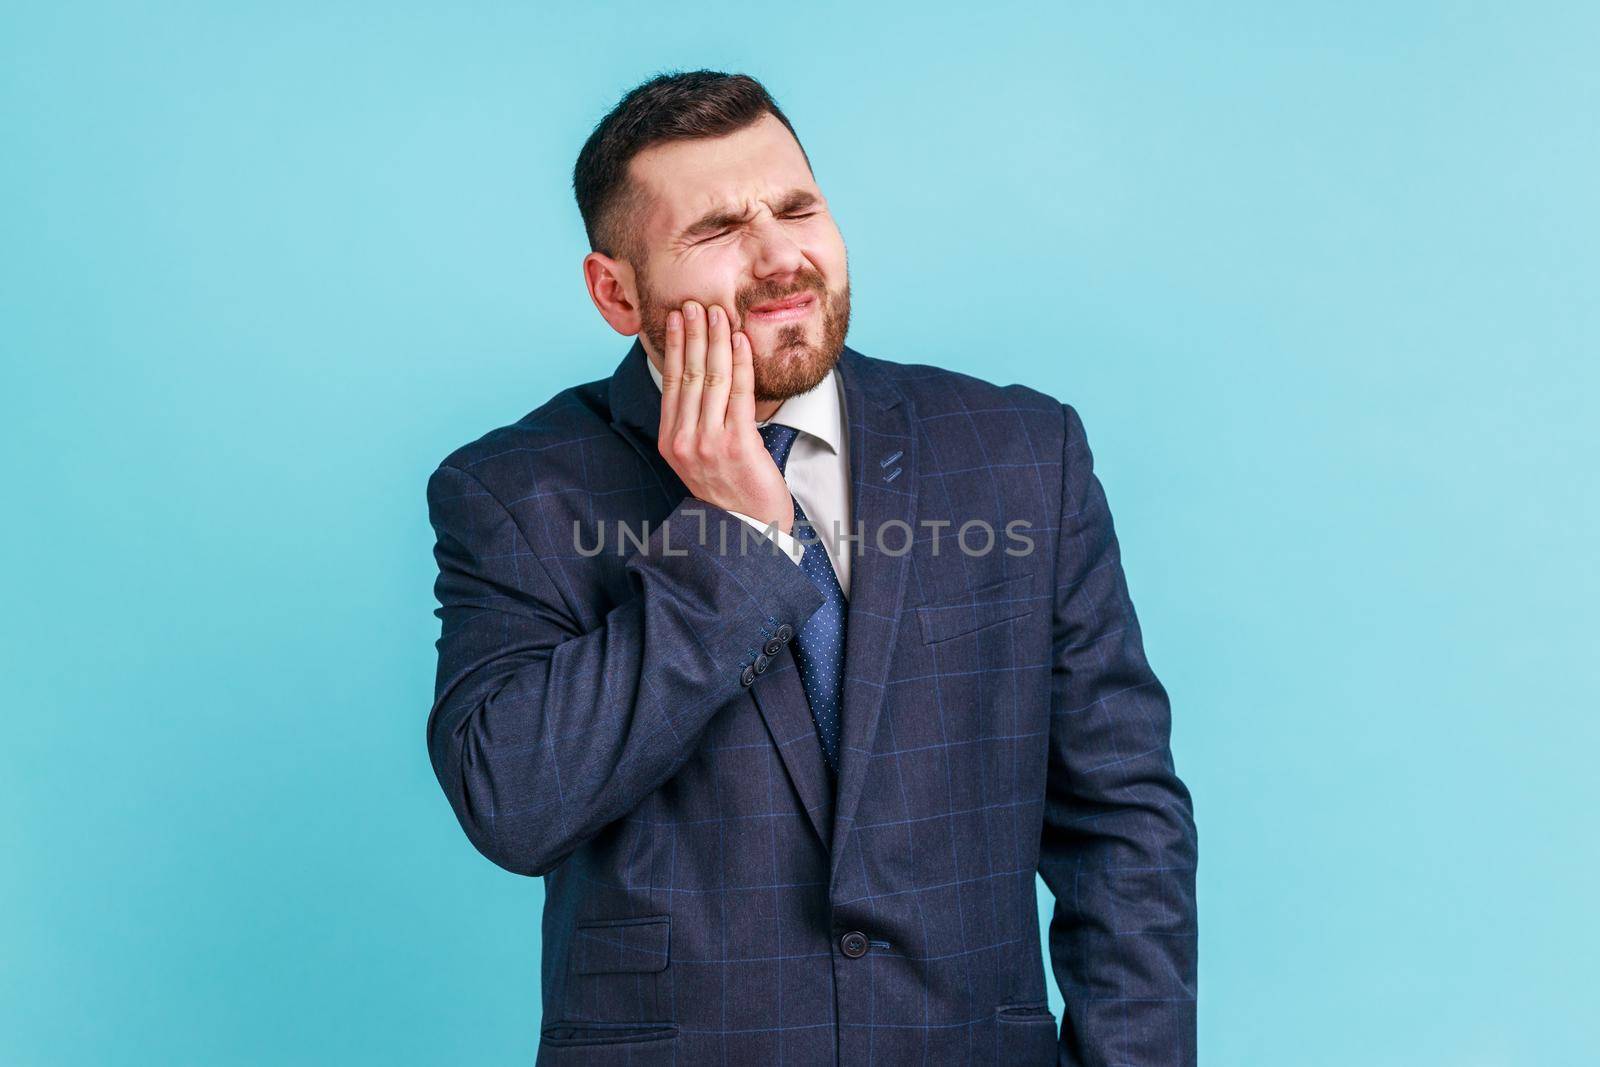 Unhappy bearded man wearing official style suit feeling toothache, touching sore cheek, suffering from cavities, cracked teeth, gum recession. by Khosro1